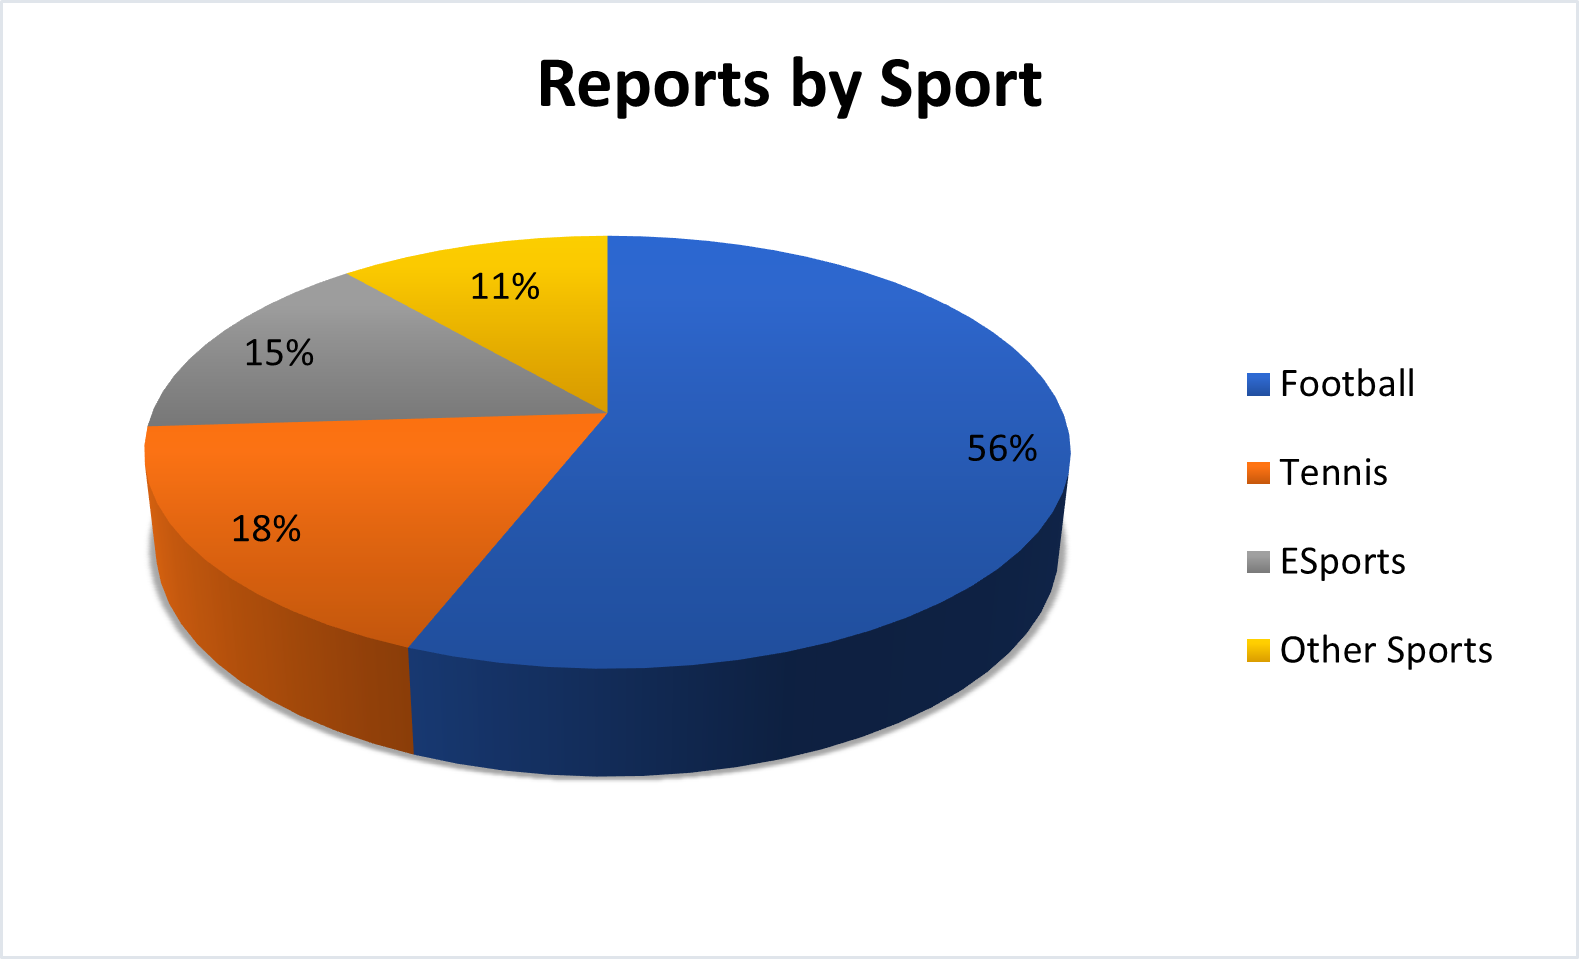 Reports by sport - November 2021 - A pie chart made up of 4 sections. Each section is a form of sport.